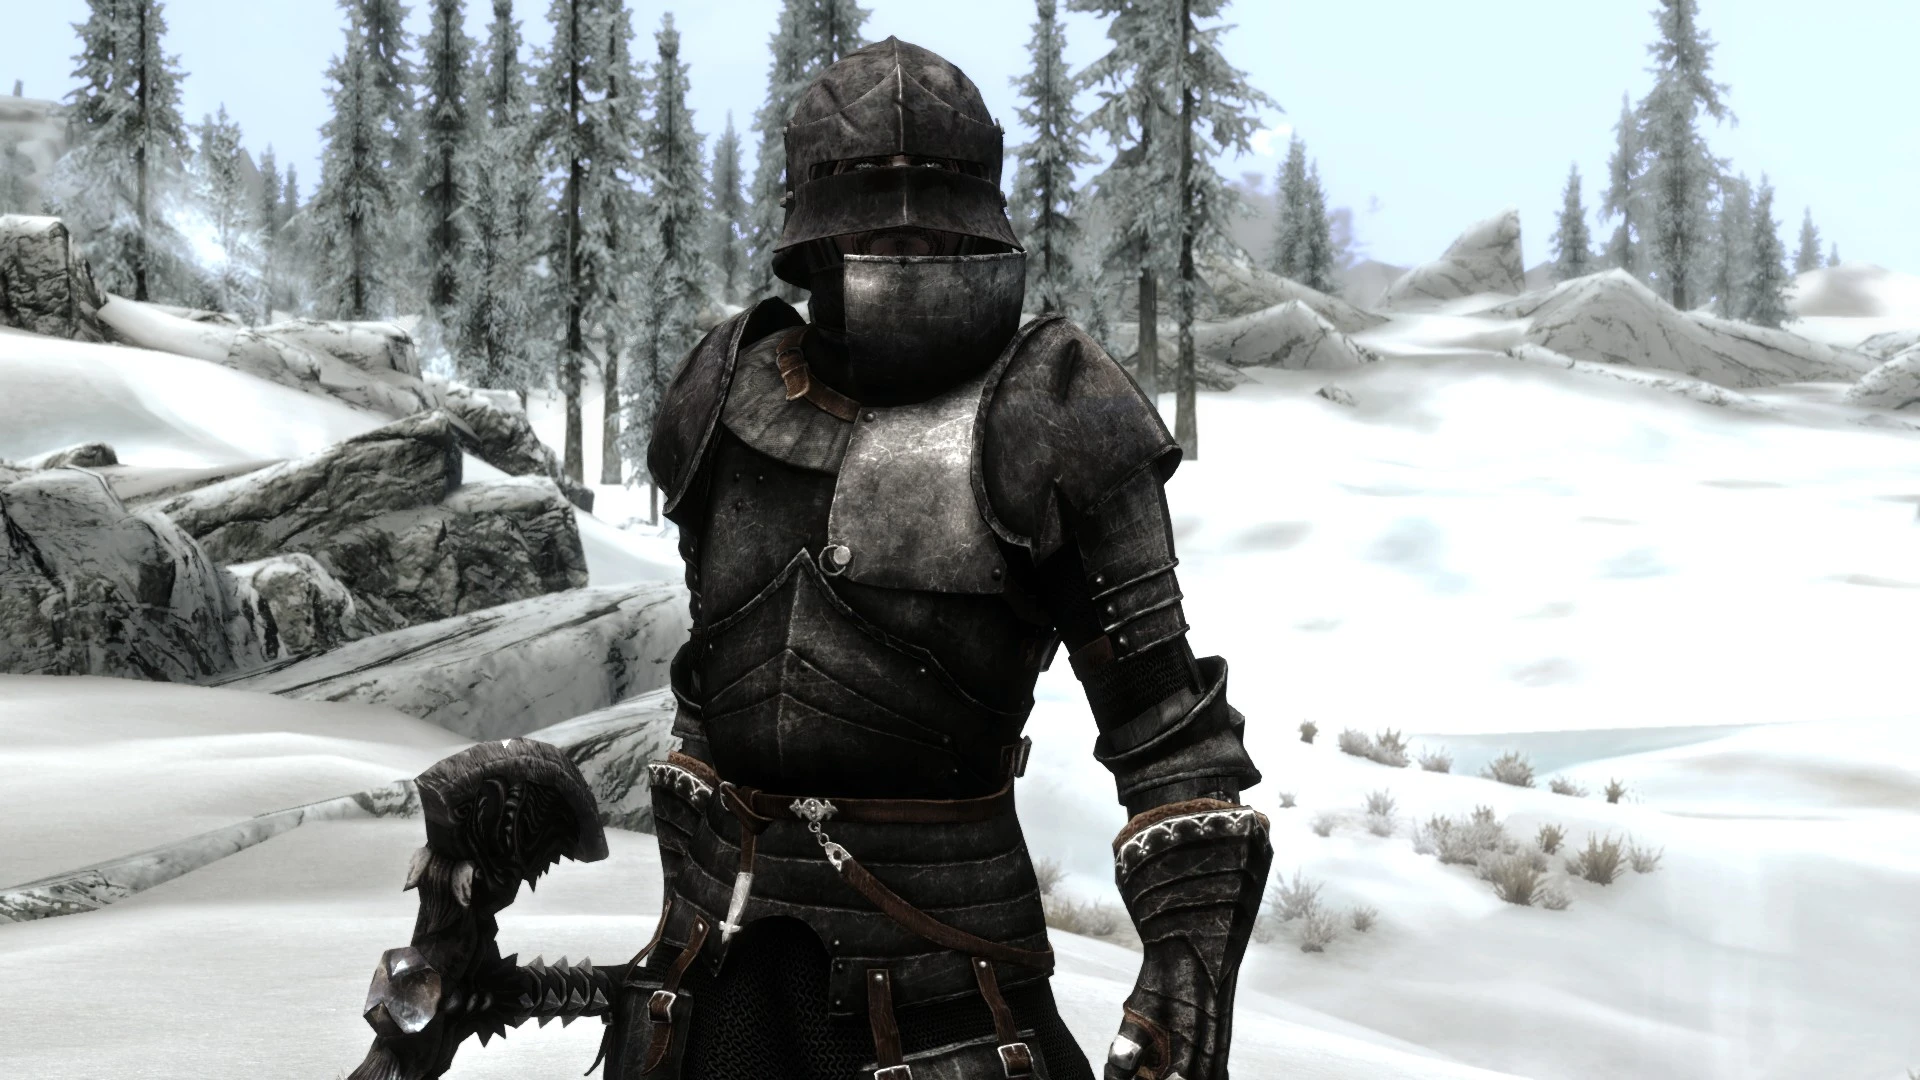 [finding] This Armor Request And Find Skyrim Non Adult Mods Loverslab